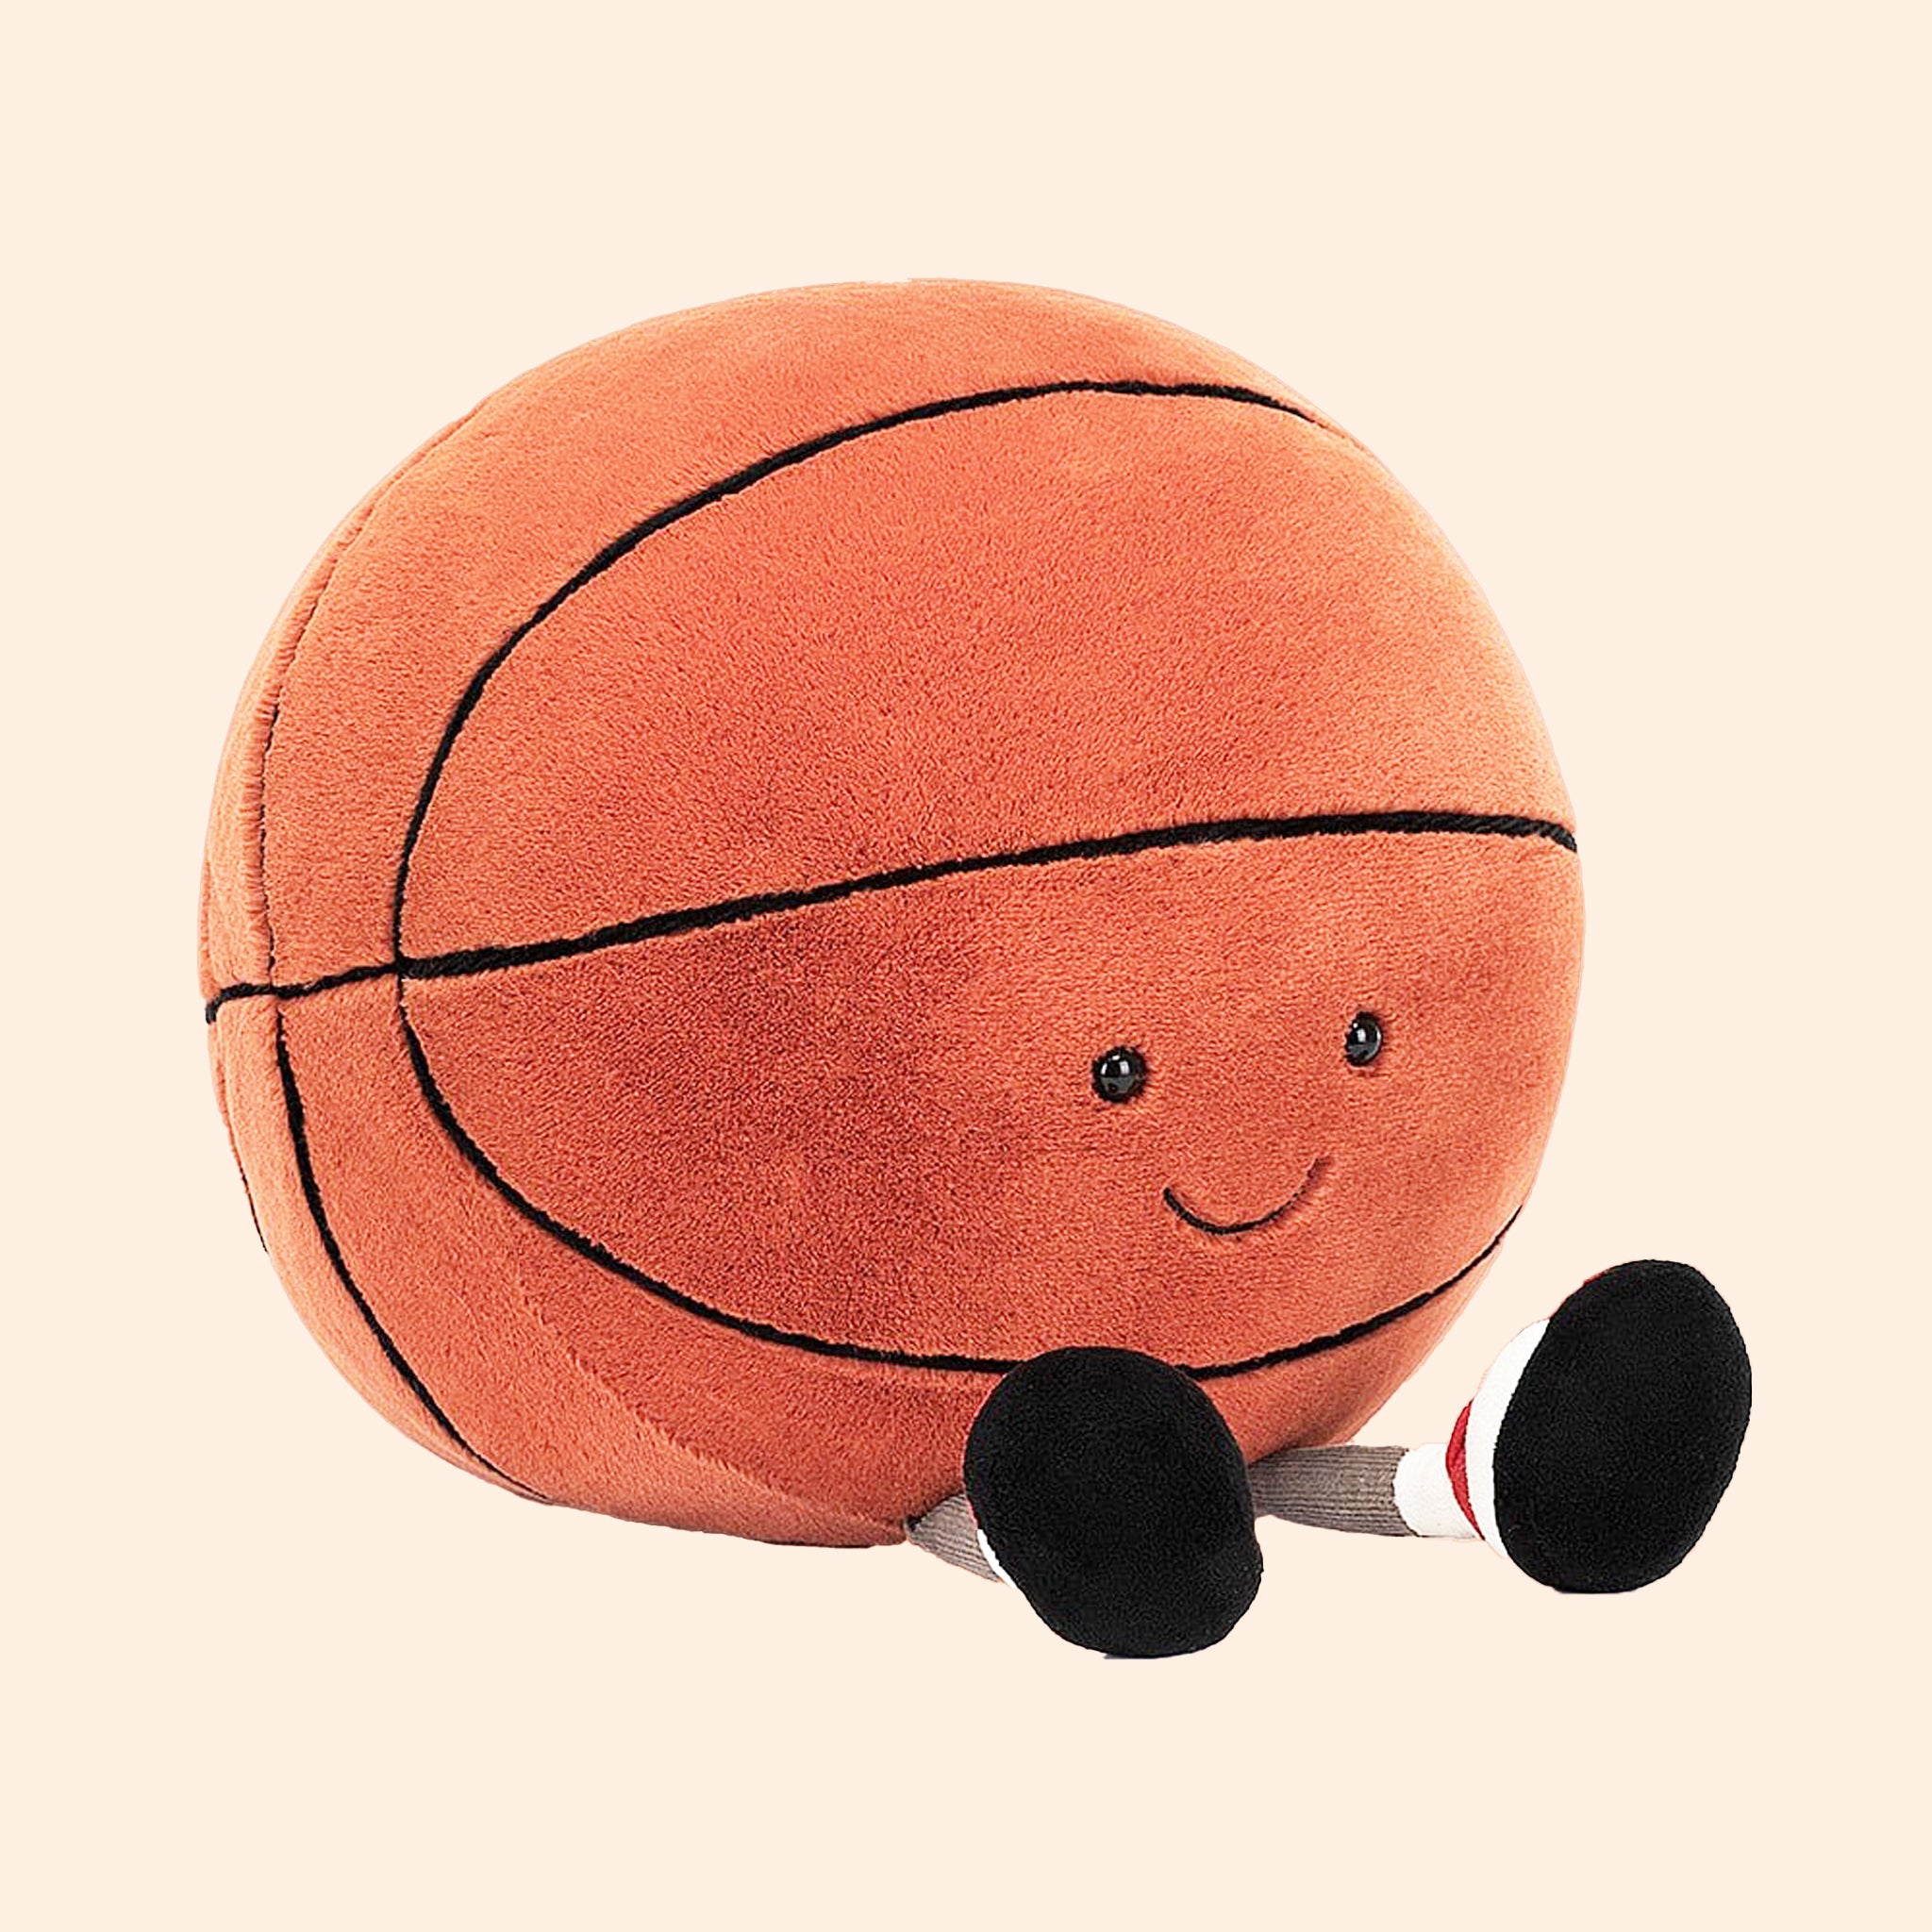 On an orange background is an orange basketball stuffed toy with a smiling face and feet.